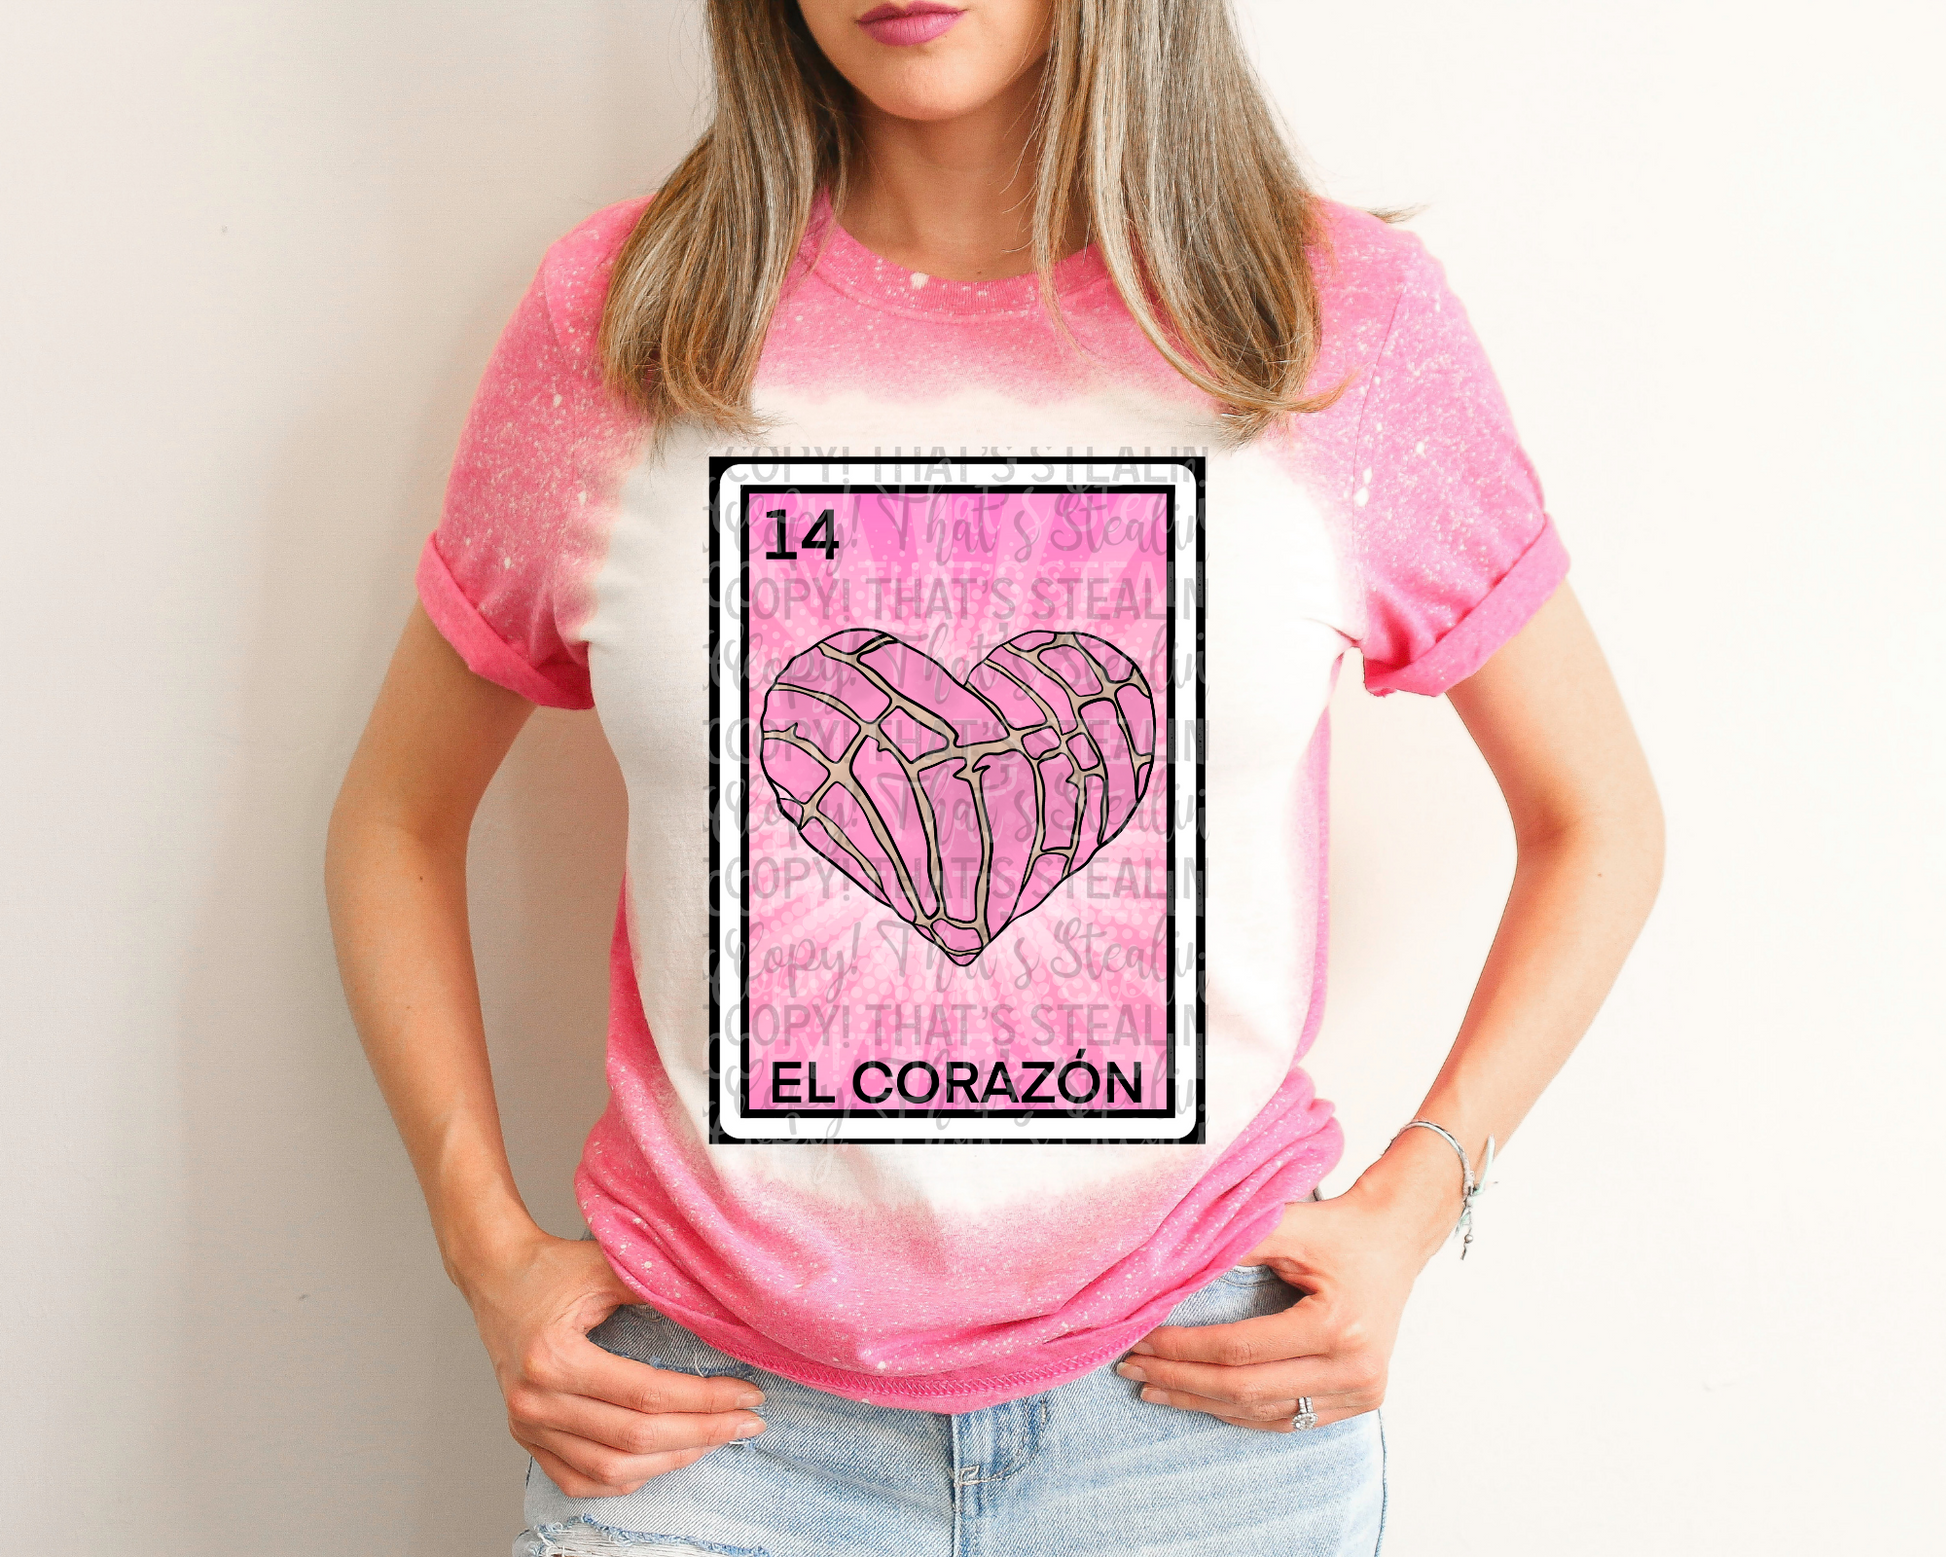 El corazon in heather heliconia bleached shirt. -Mayan Sub Shop